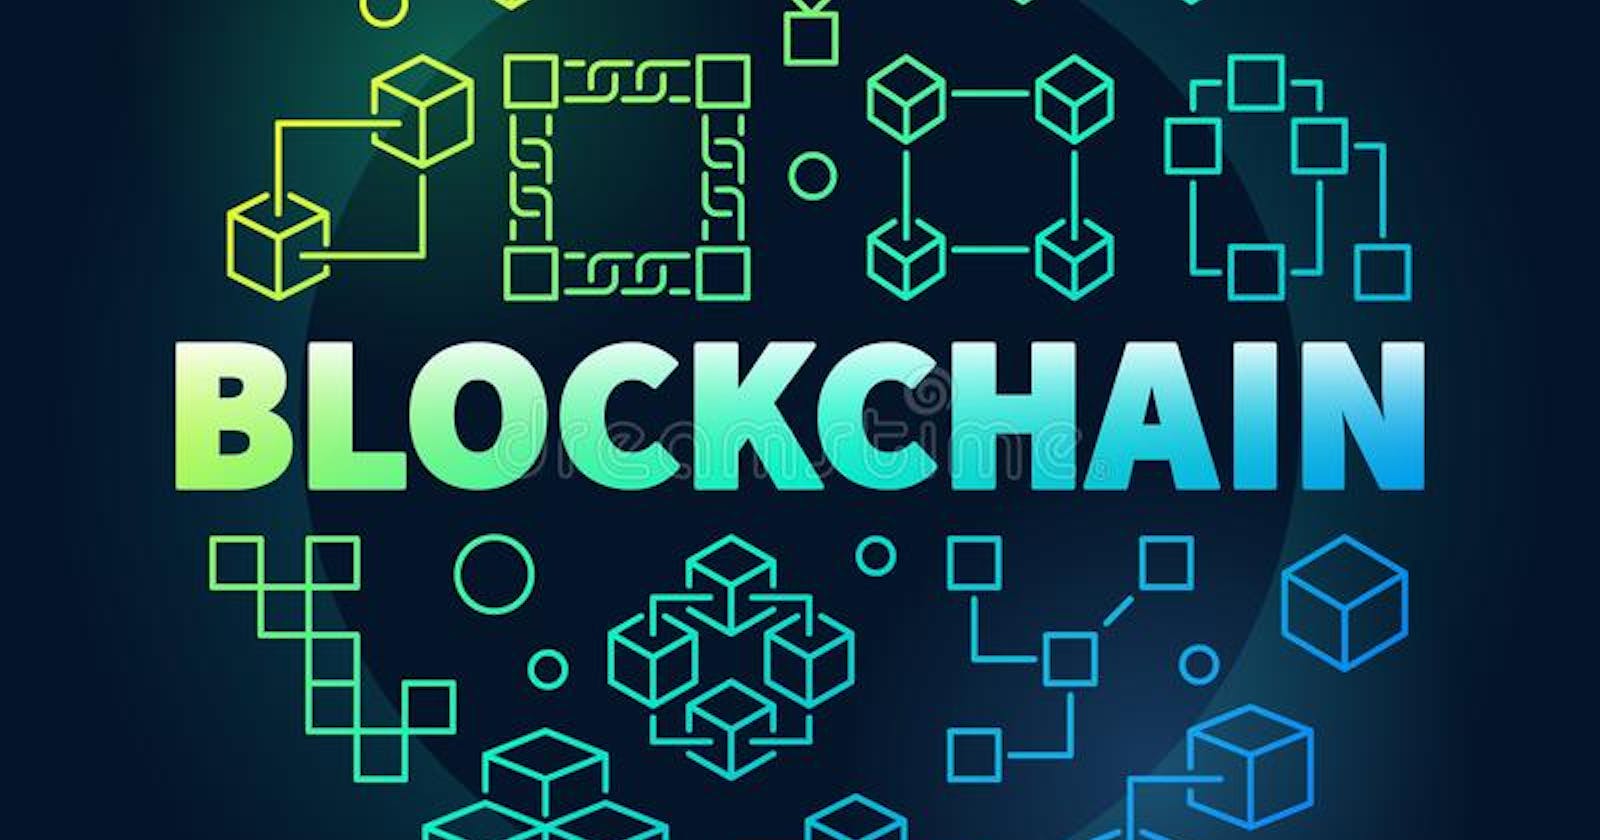 Some Characteristics and Use cases of Blockchain